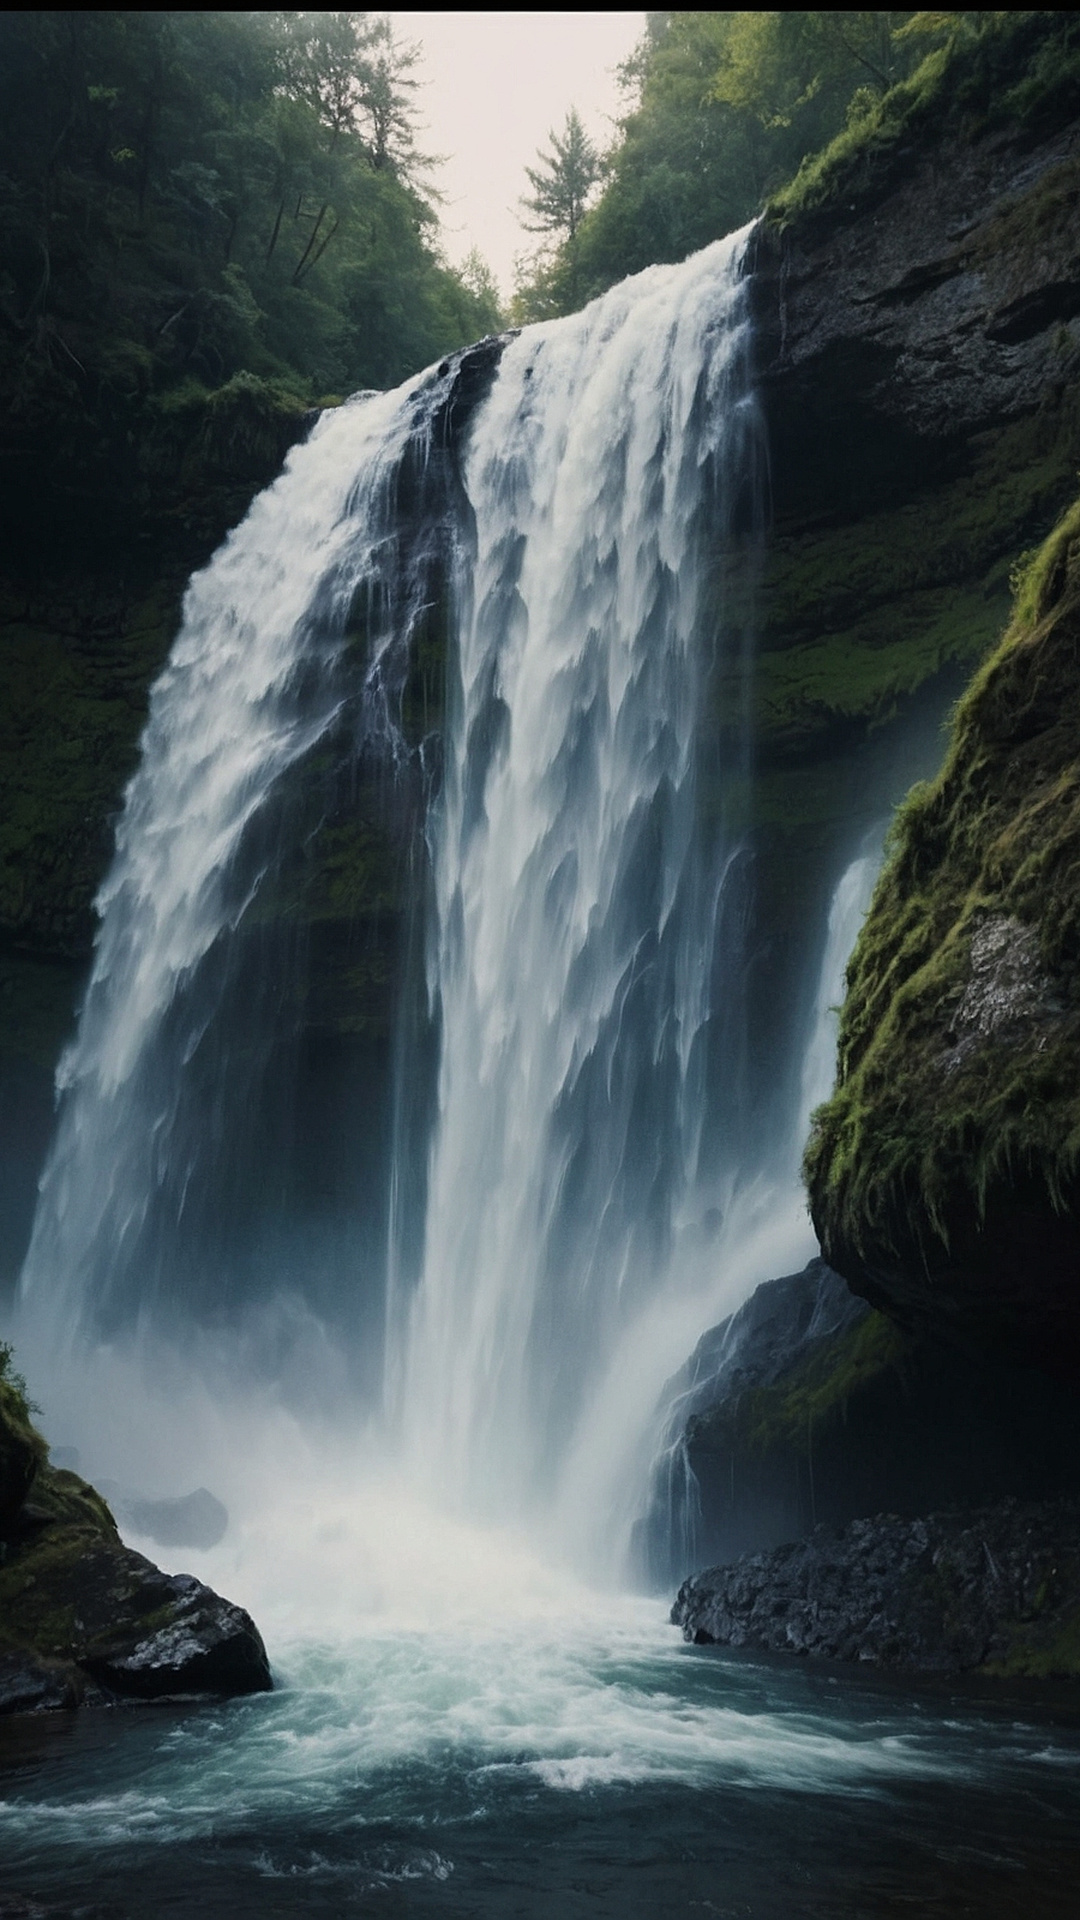 Tranquility Falls: Peaceful Waterfall Wallpaper Styles